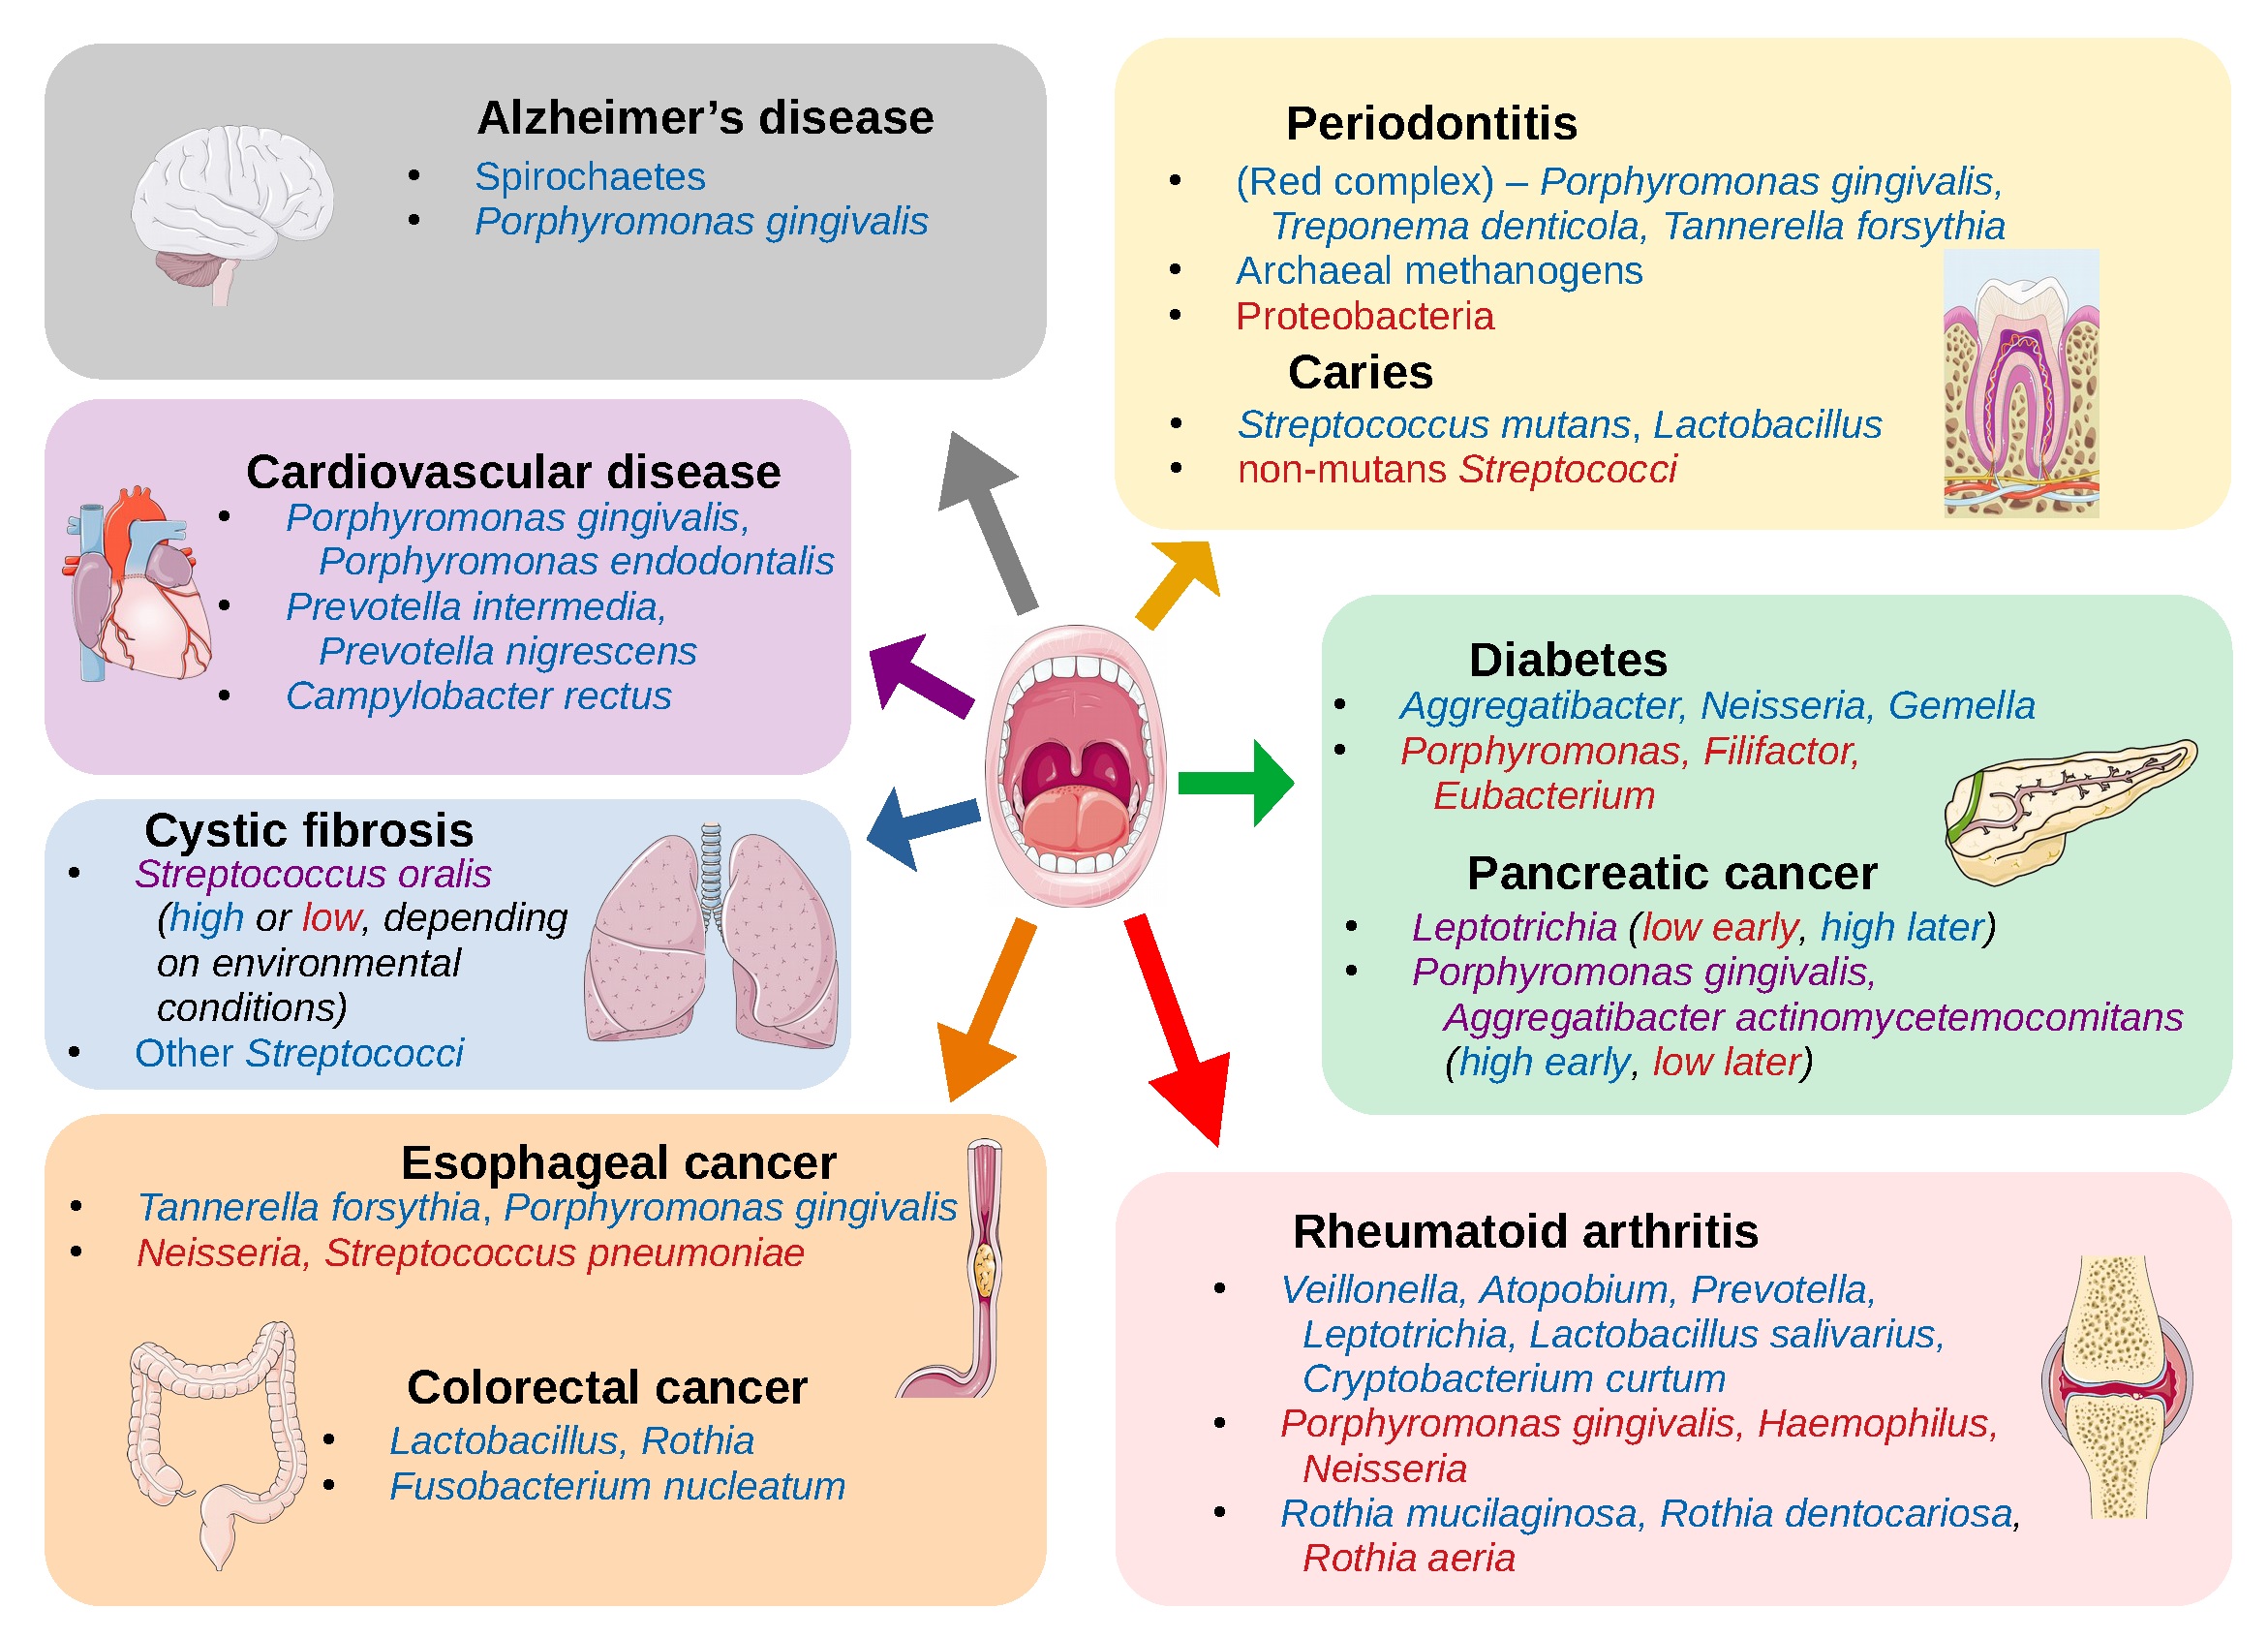 Graphical abstract of various diseases associated with the oral microbiome.